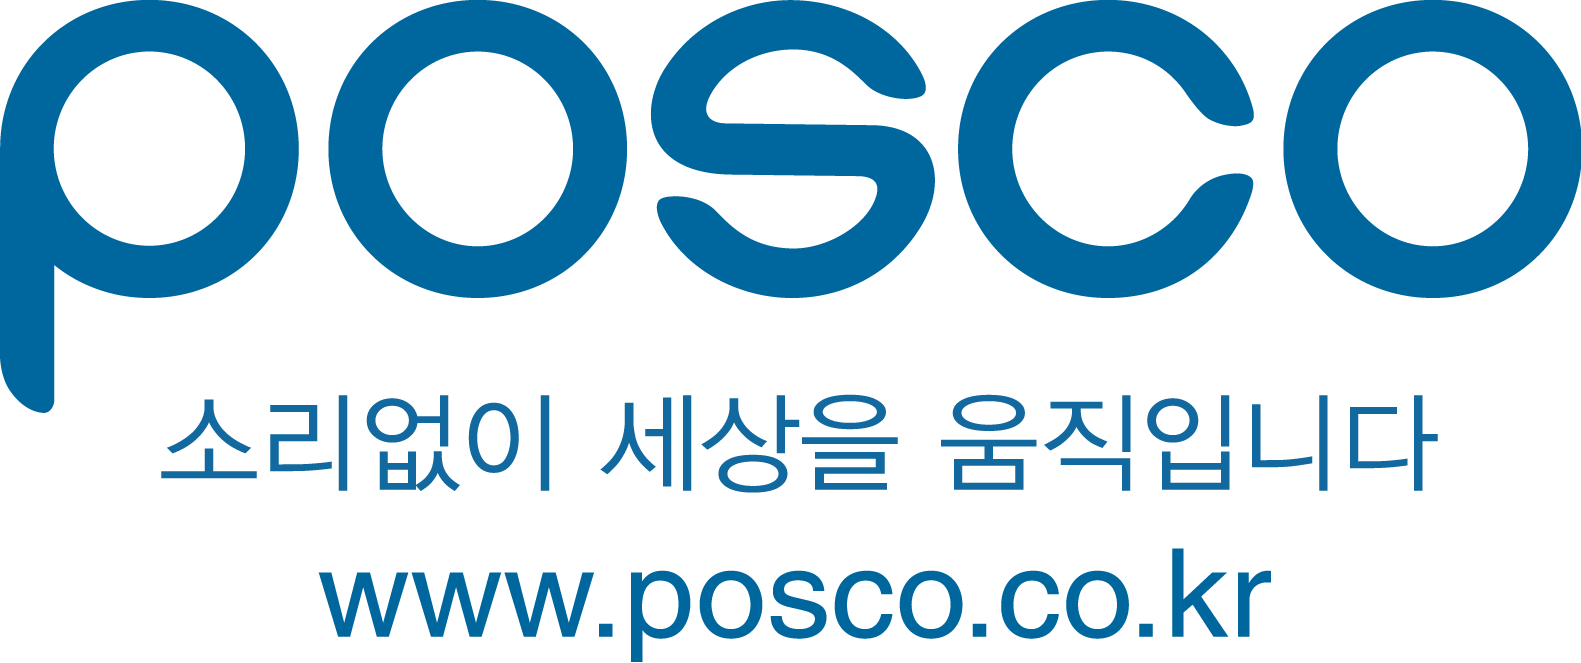 CEO Ohjoon Kwon had talks with employees who experienced Middle Eastern countries